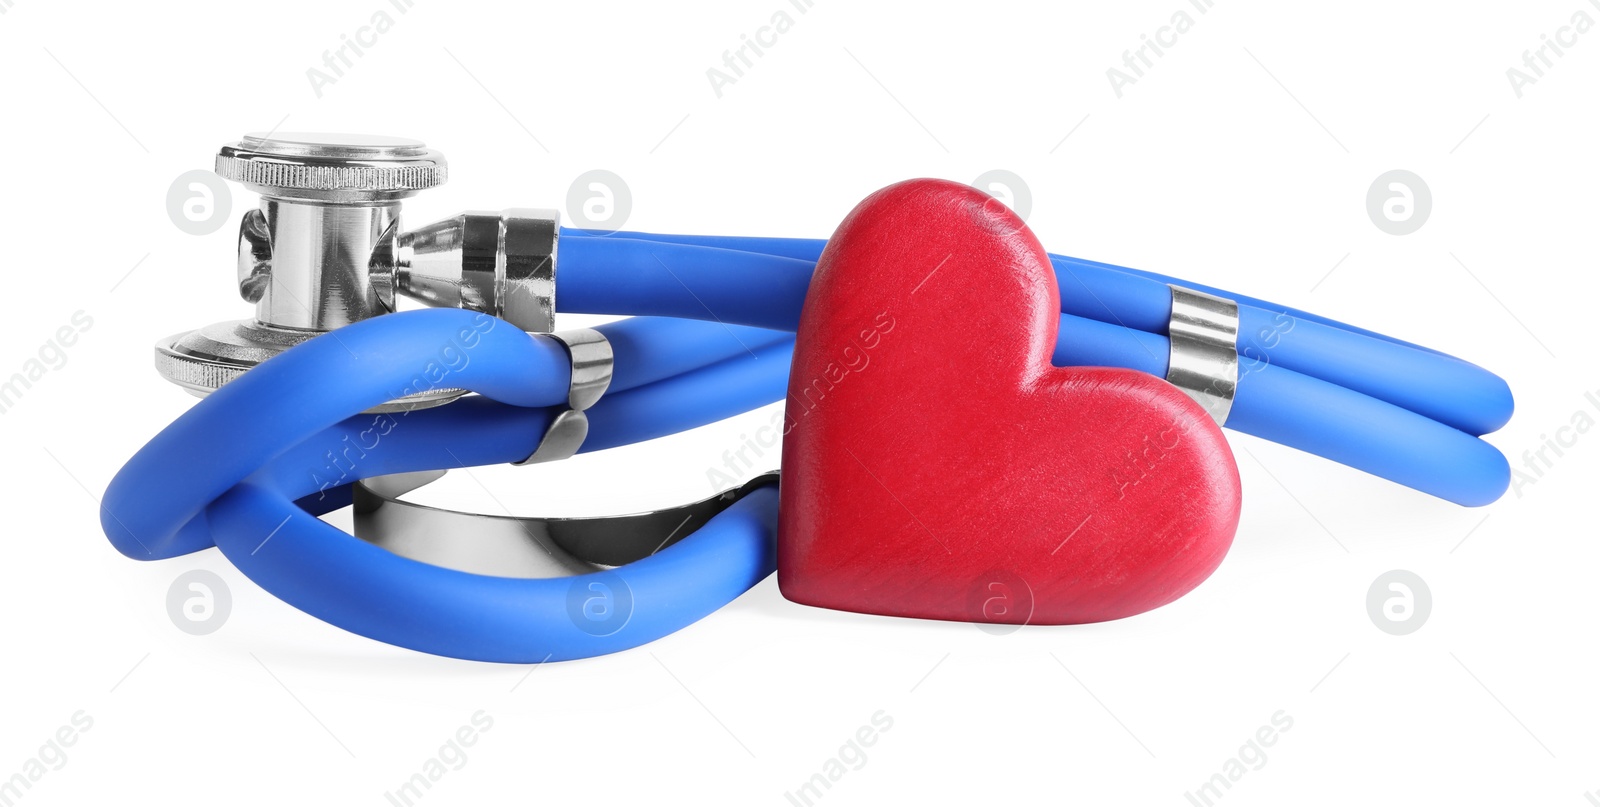 Photo of Stethoscope and red heart isolated on white